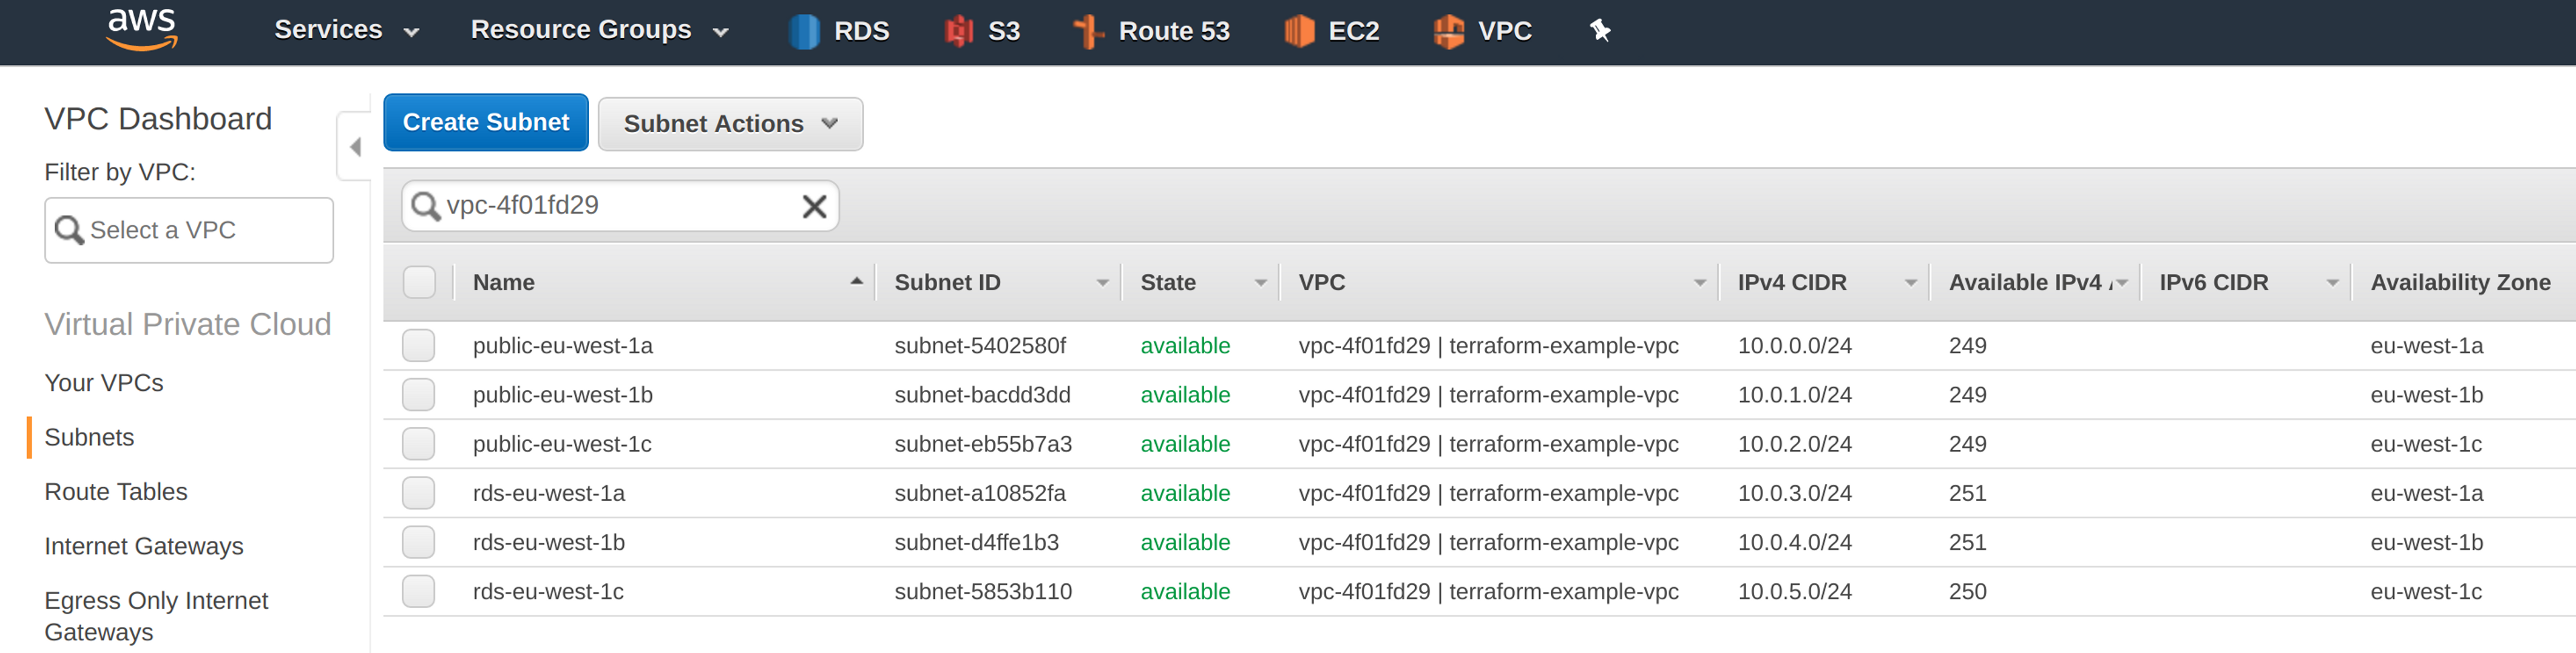 Subnets in the VPC dashboard